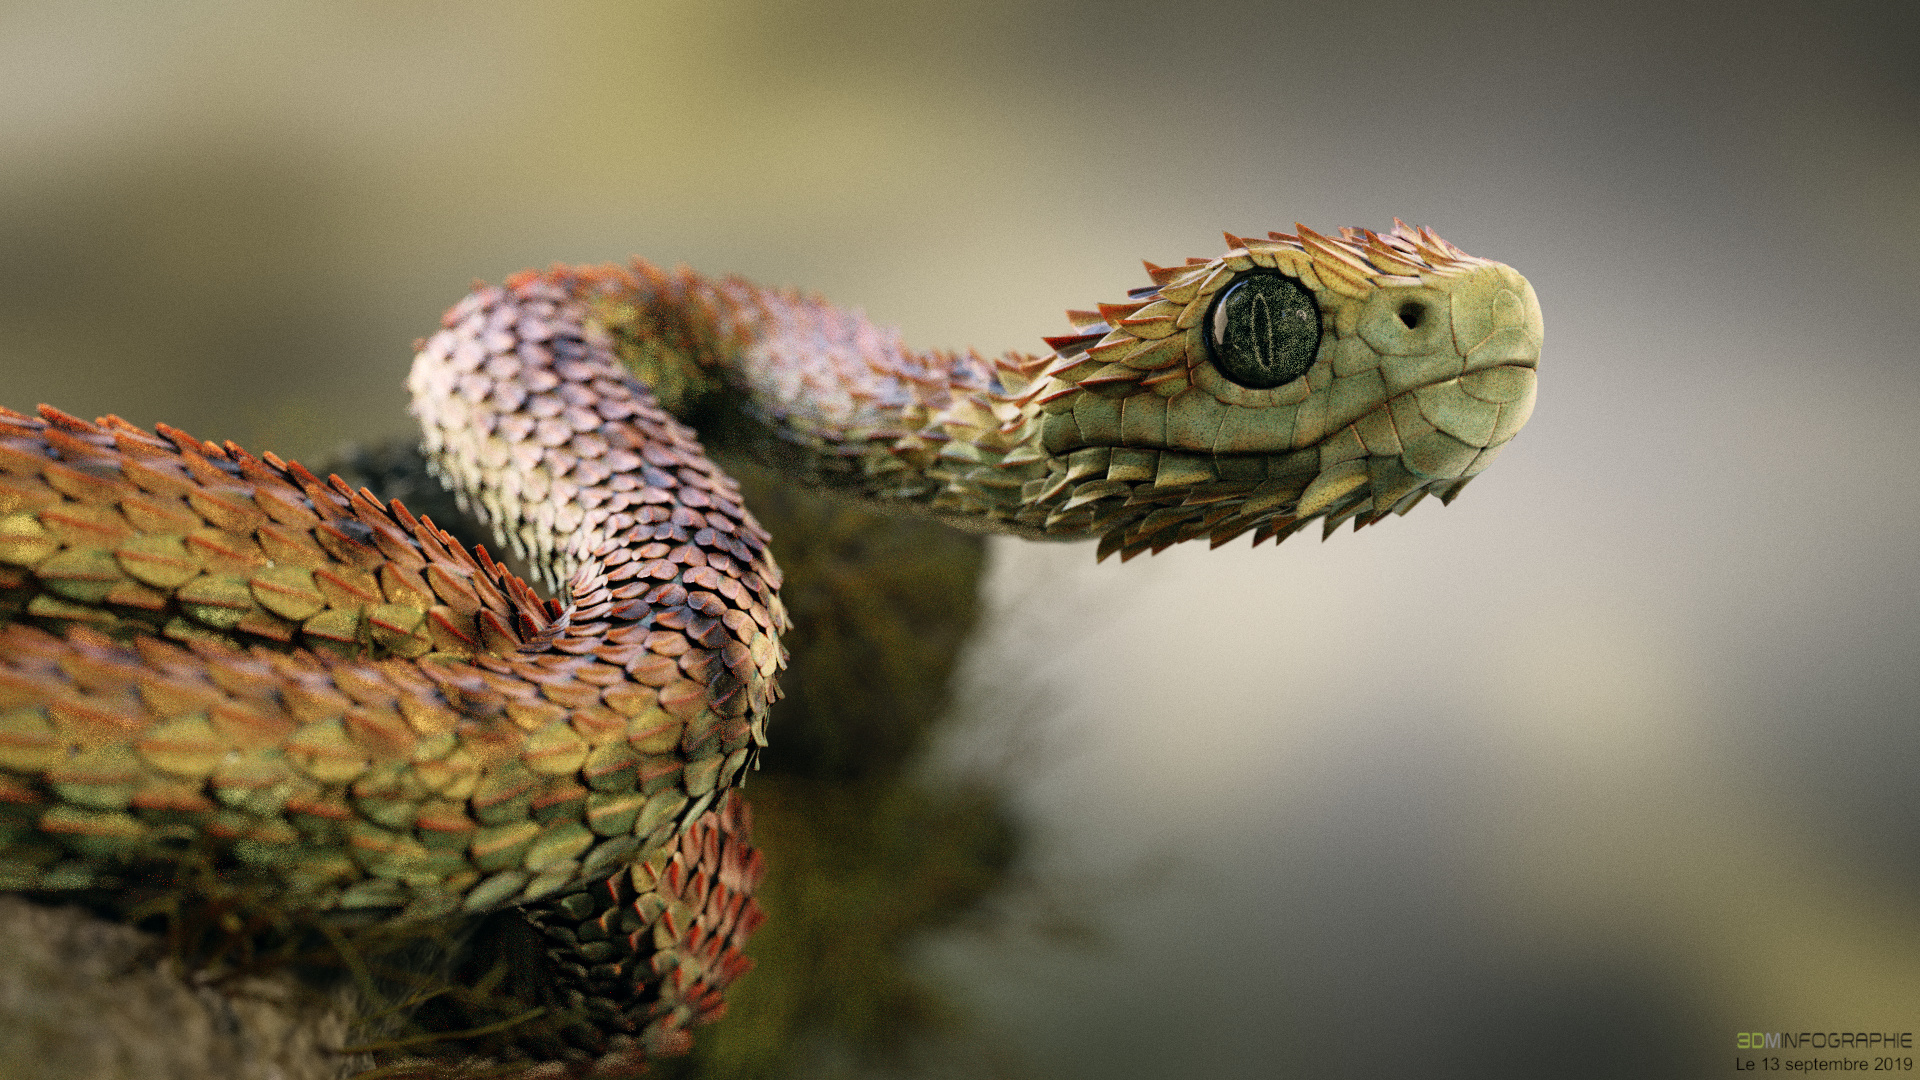 21 Atheris Hispida Images, Stock Photos, 3D objects, & Vectors